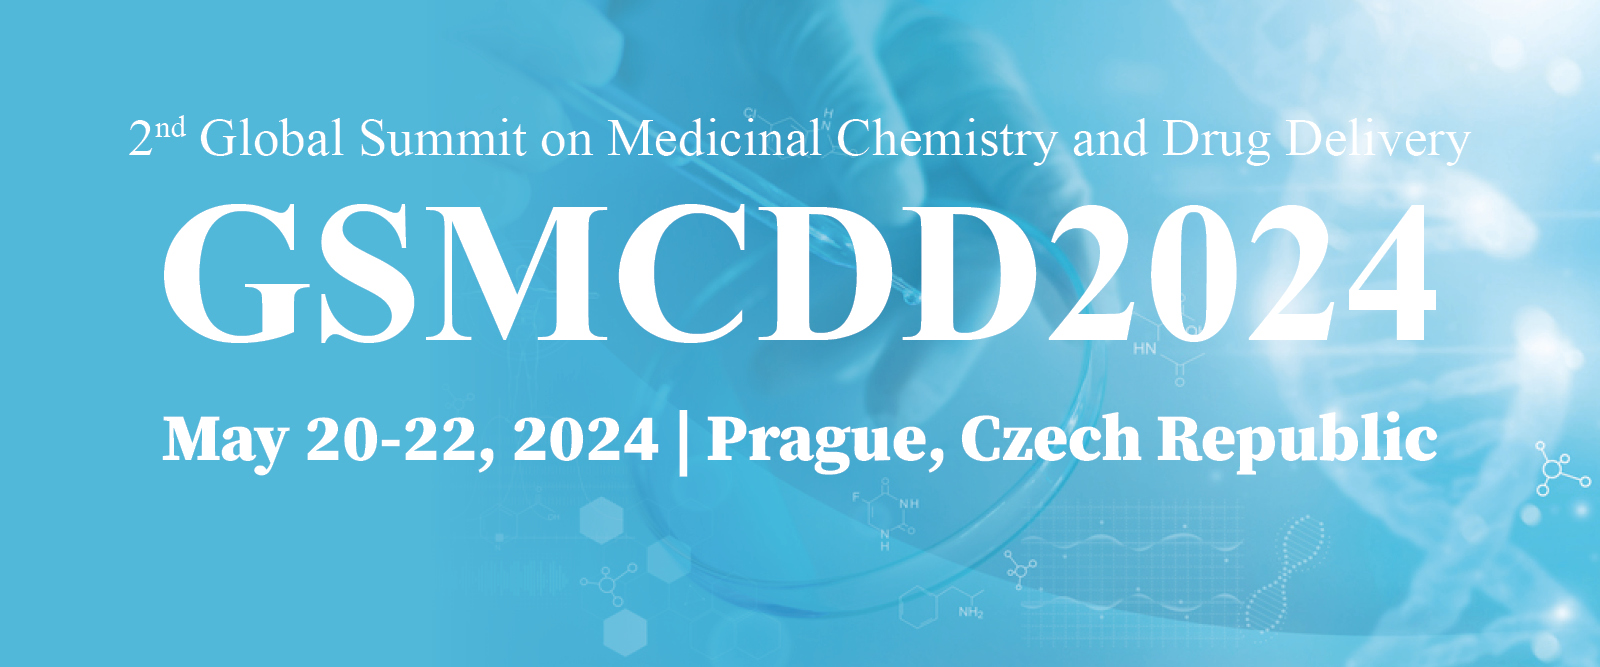 2nd Global Summit on Medicinal Chemistry and Drug Delivery